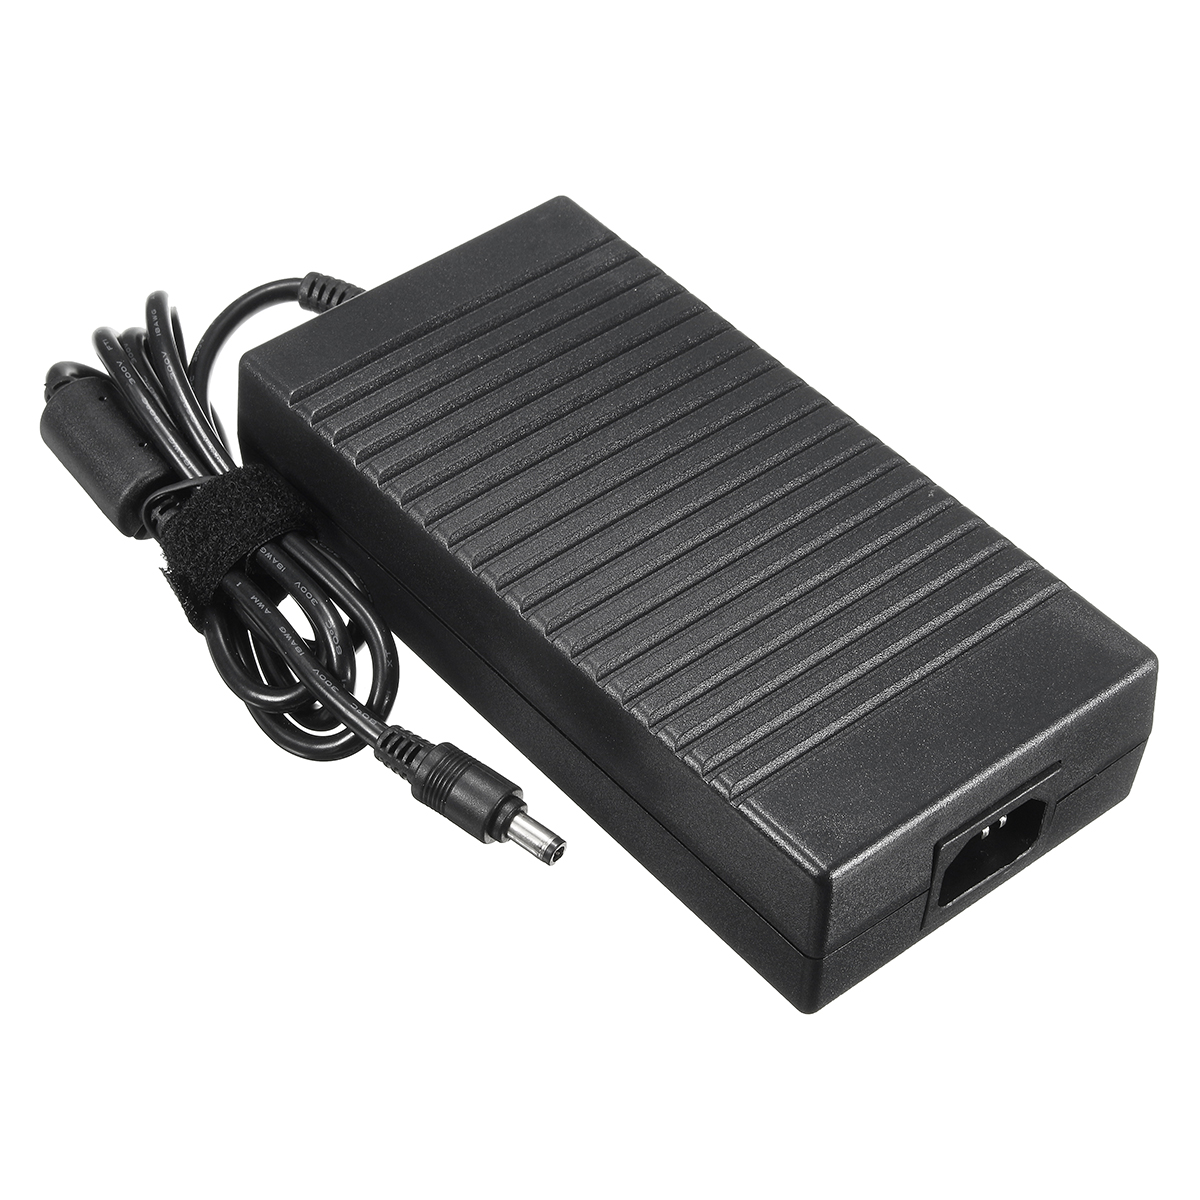 180W-19V-95A-AC-Adapter-Charger-Power-for-MSI-GT60-GT70-Notebook-Laptop-Power-Connector-1122990